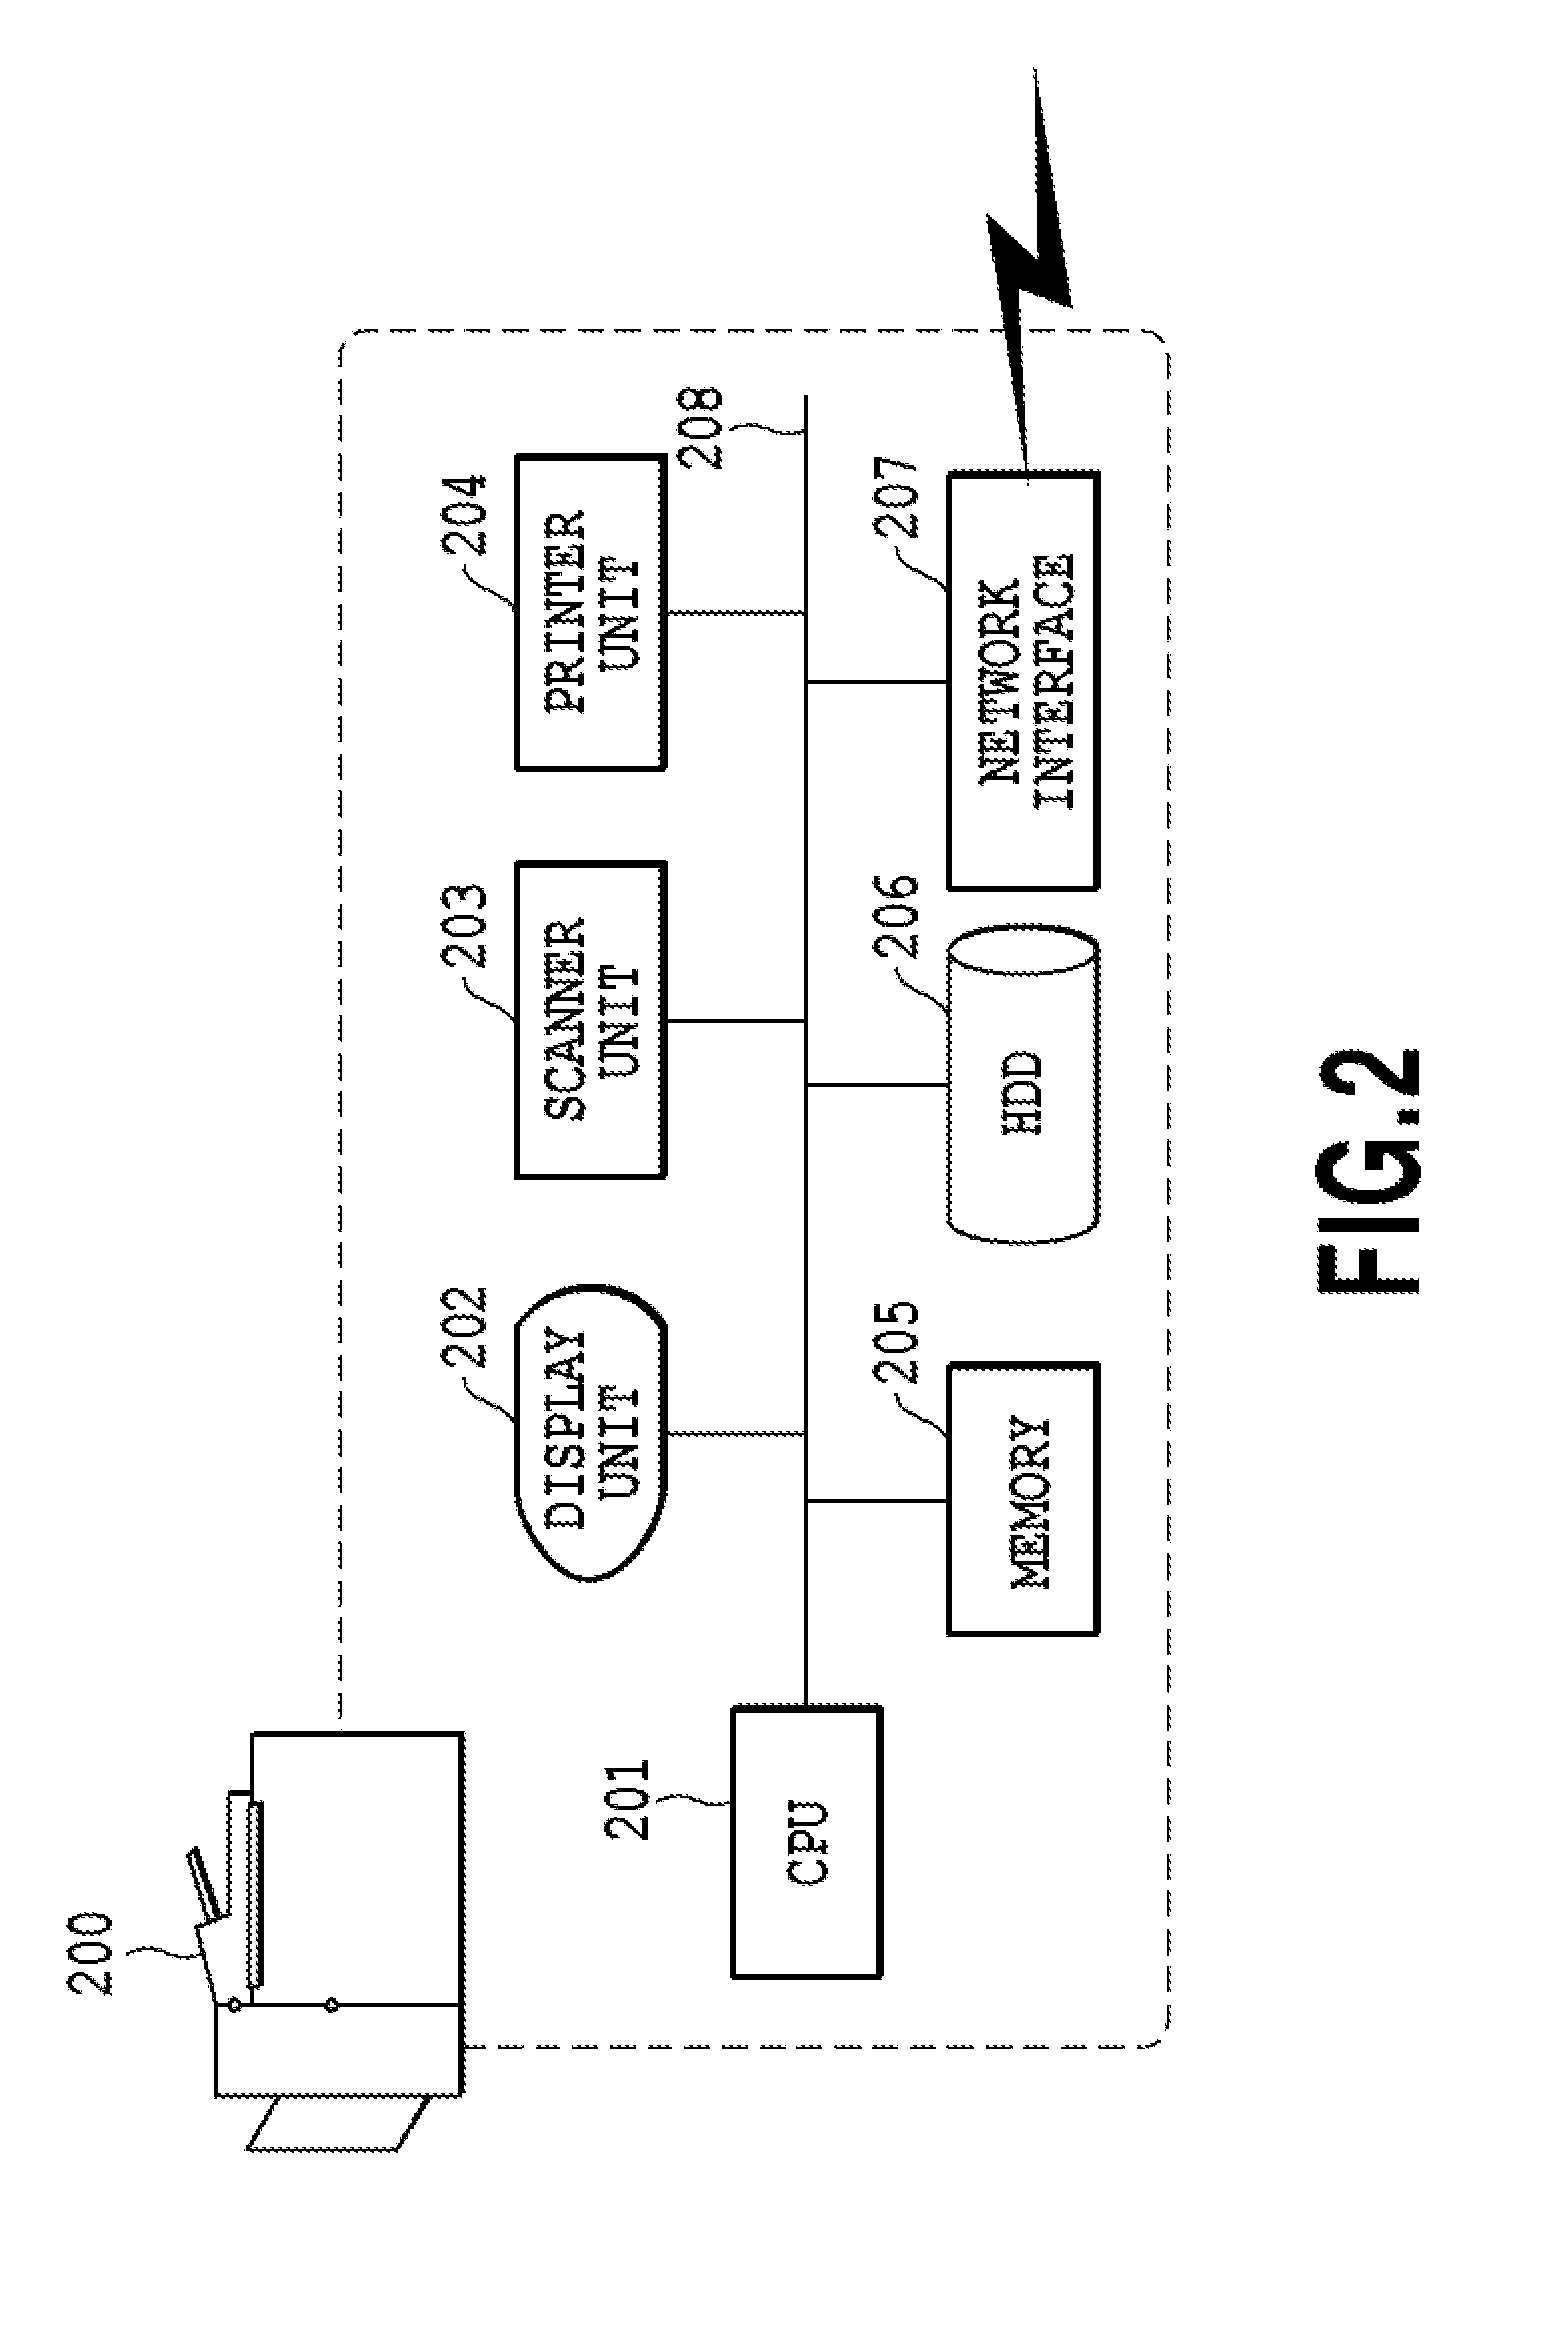 Apparatus capable of controlling output using two-dimensional code, and control method and program thereof